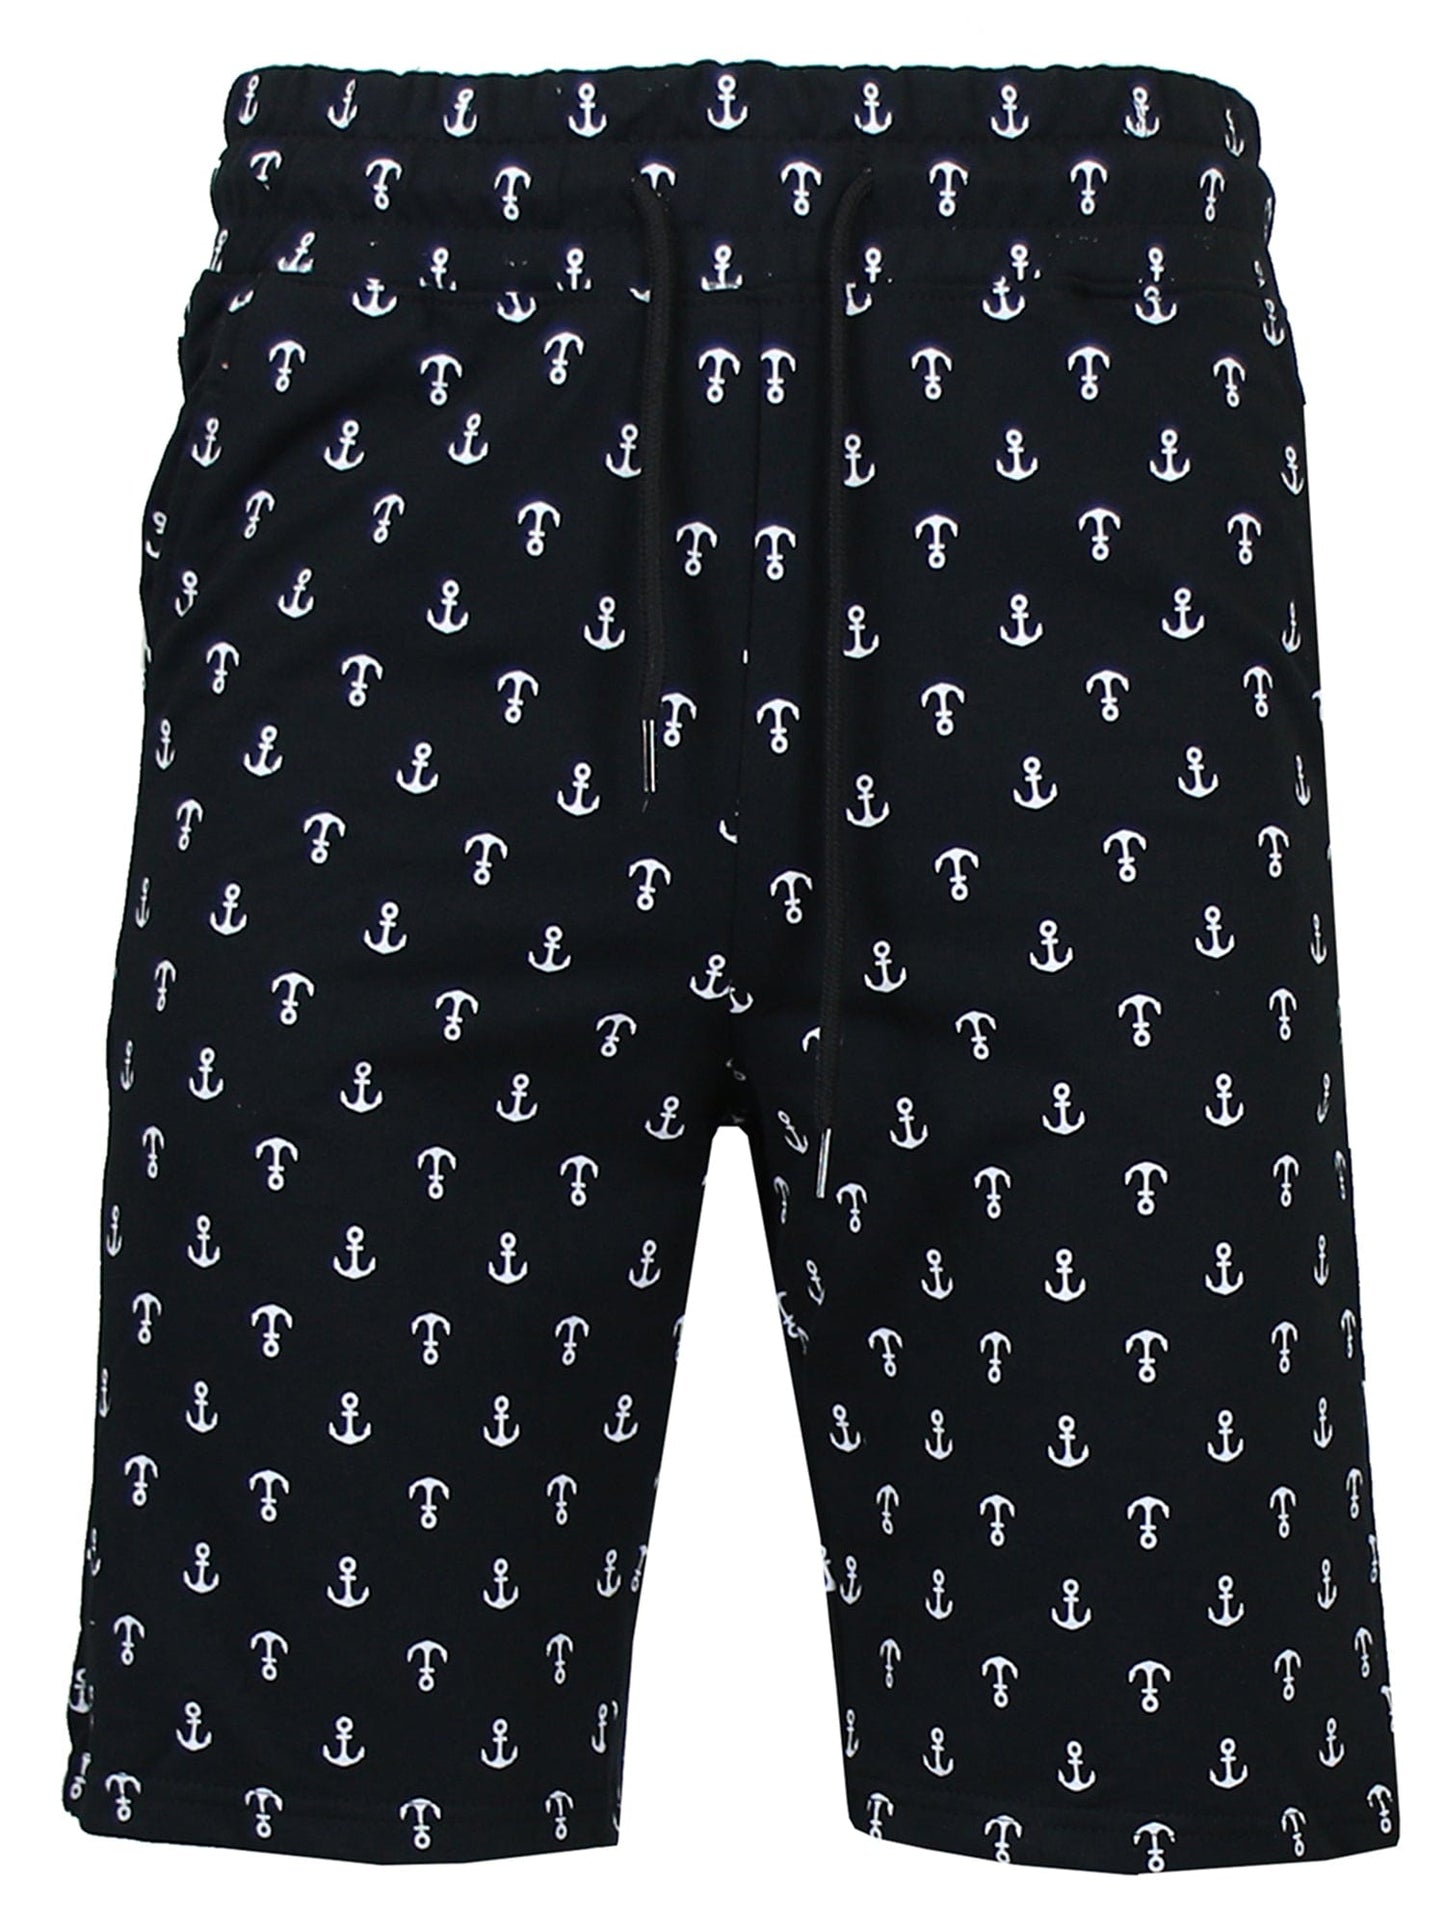 Men's French Terry Printed Shorts - GalaxybyHarvic